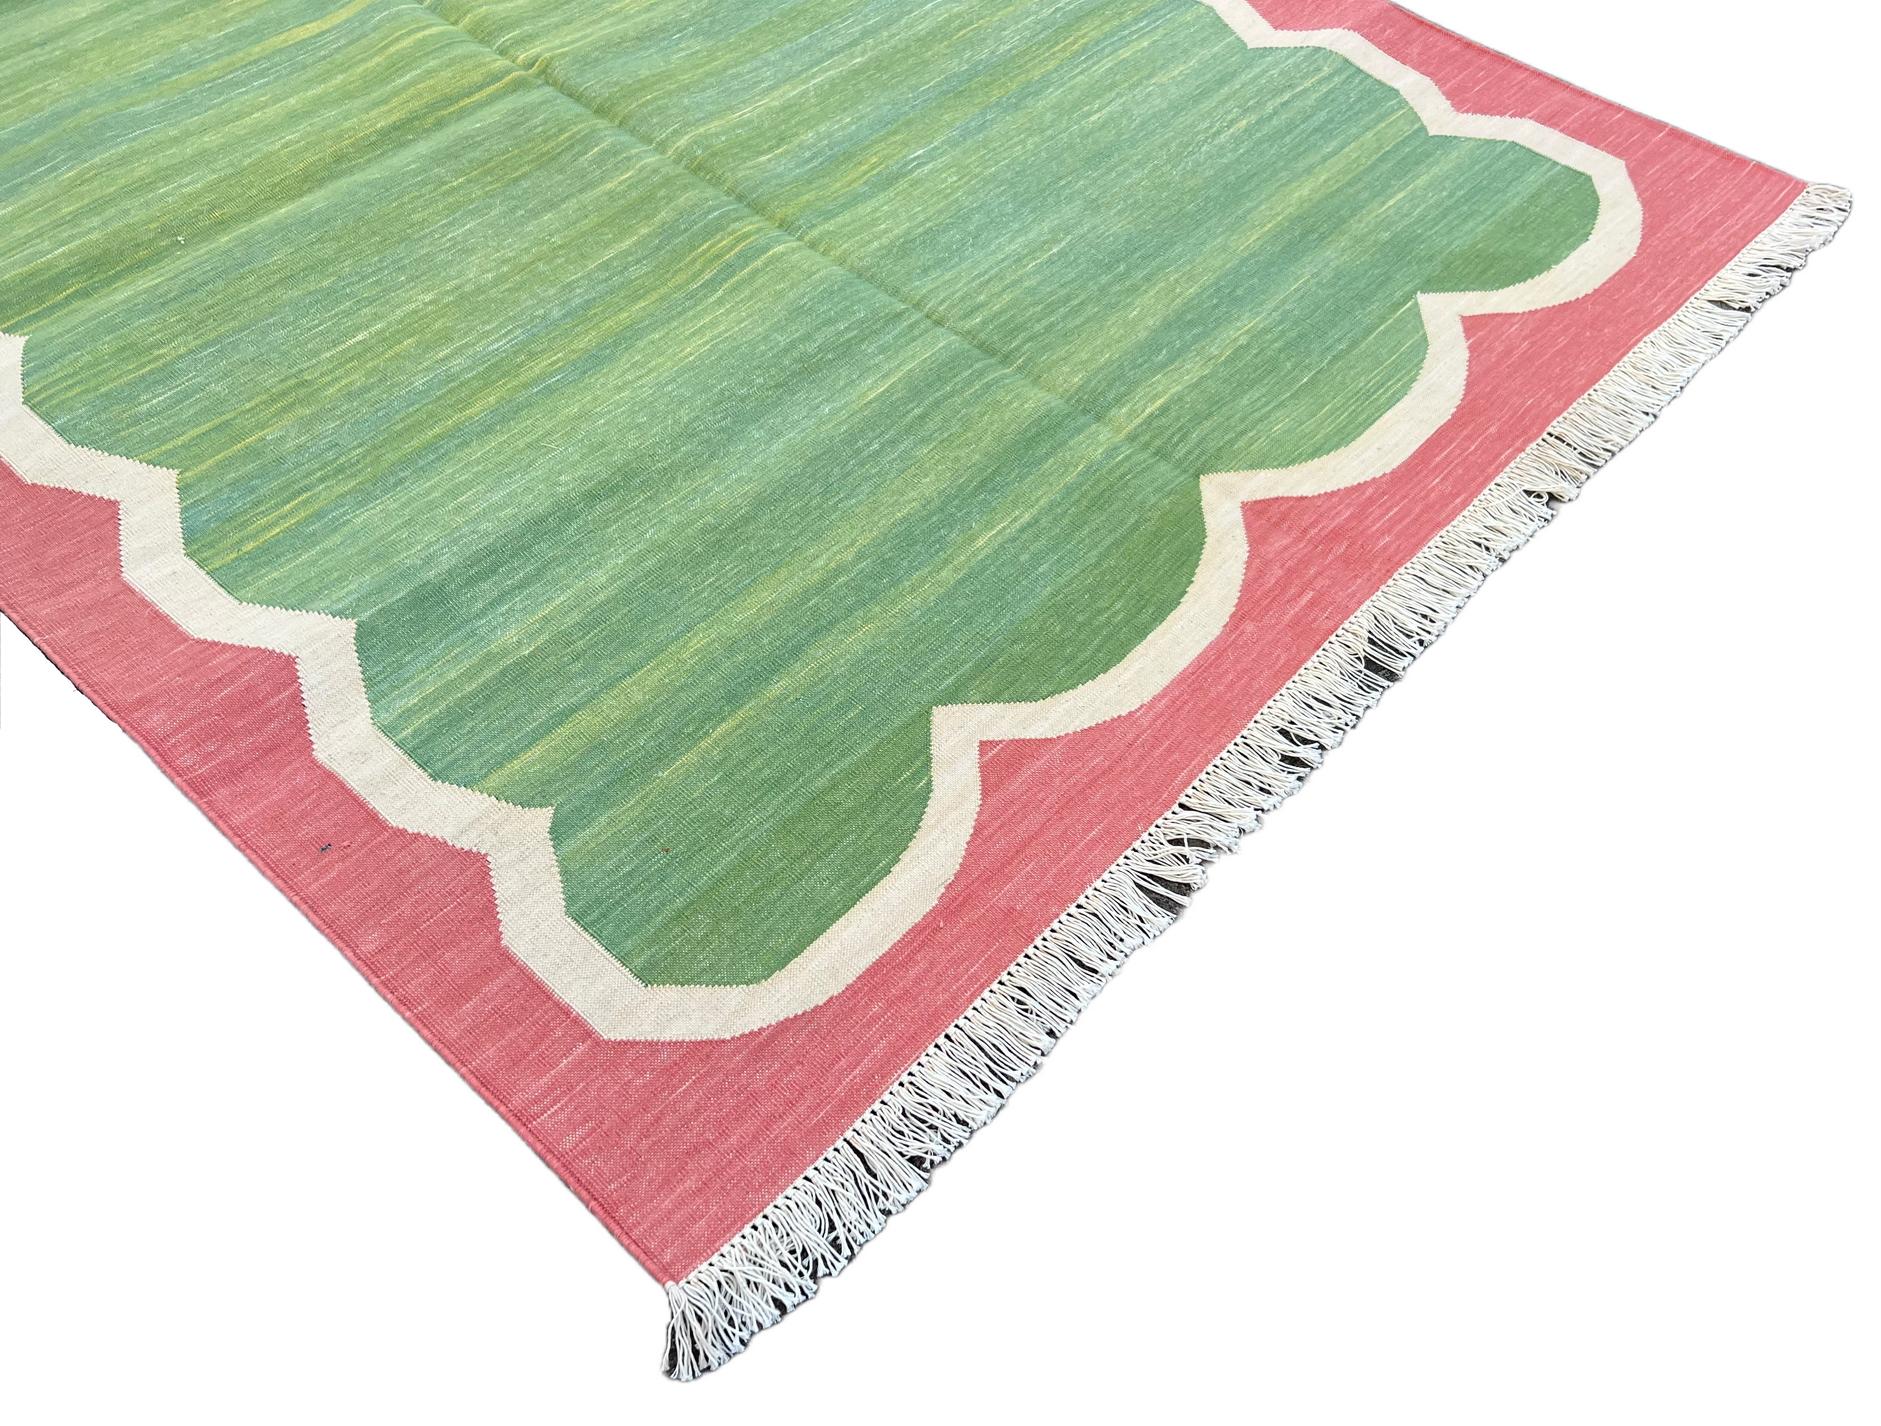 Hand-Woven Handmade Cotton Area Flat Weave Rug, 4x6 Green And Coral Scallop Indian Dhurrie